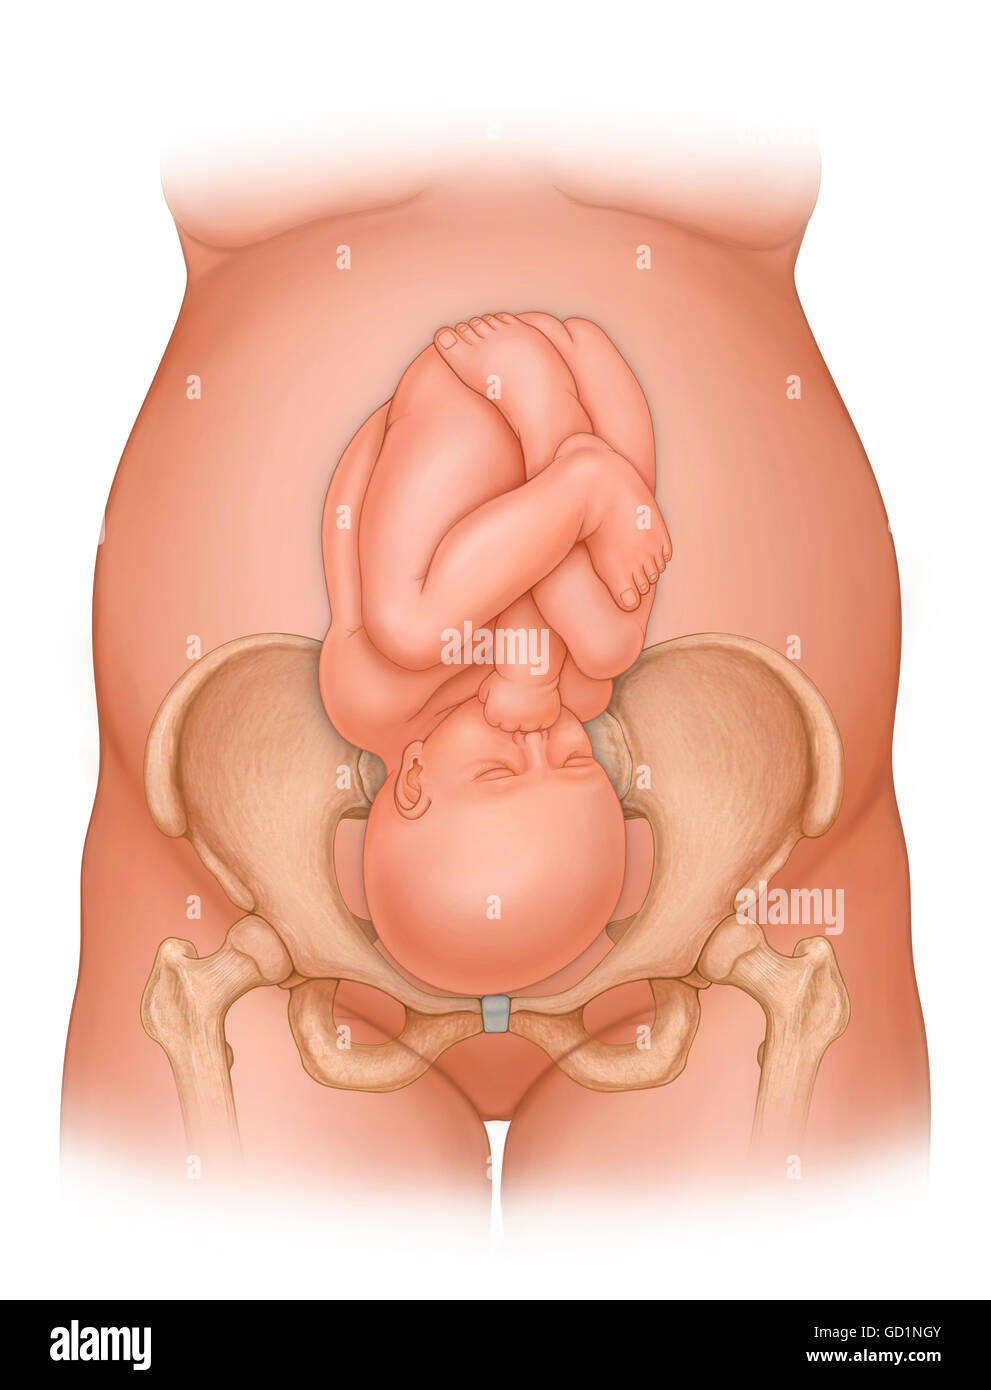 Front view of a woman nine months pregnant  (baby phantomed within) ready for delivery, with baby in improper position for delivery Stock Photo